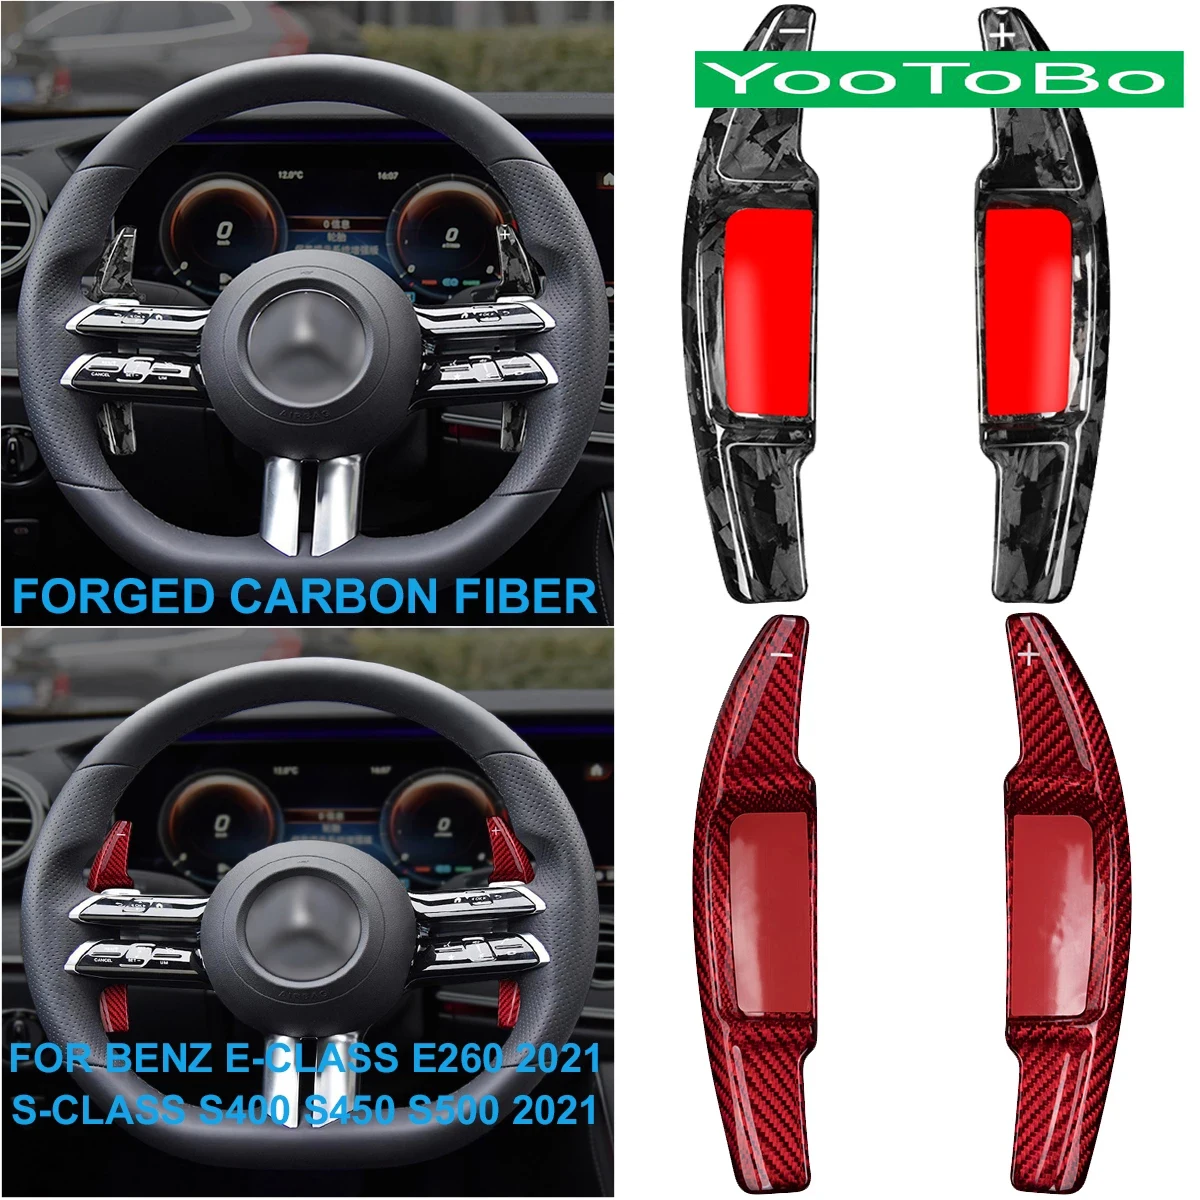 

Car Style Real Forged Carbon Fiber Steering Wheel Shifter Paddle Extension For Mercedes BENZ E S-Class E260 S400 S450 S500 2021